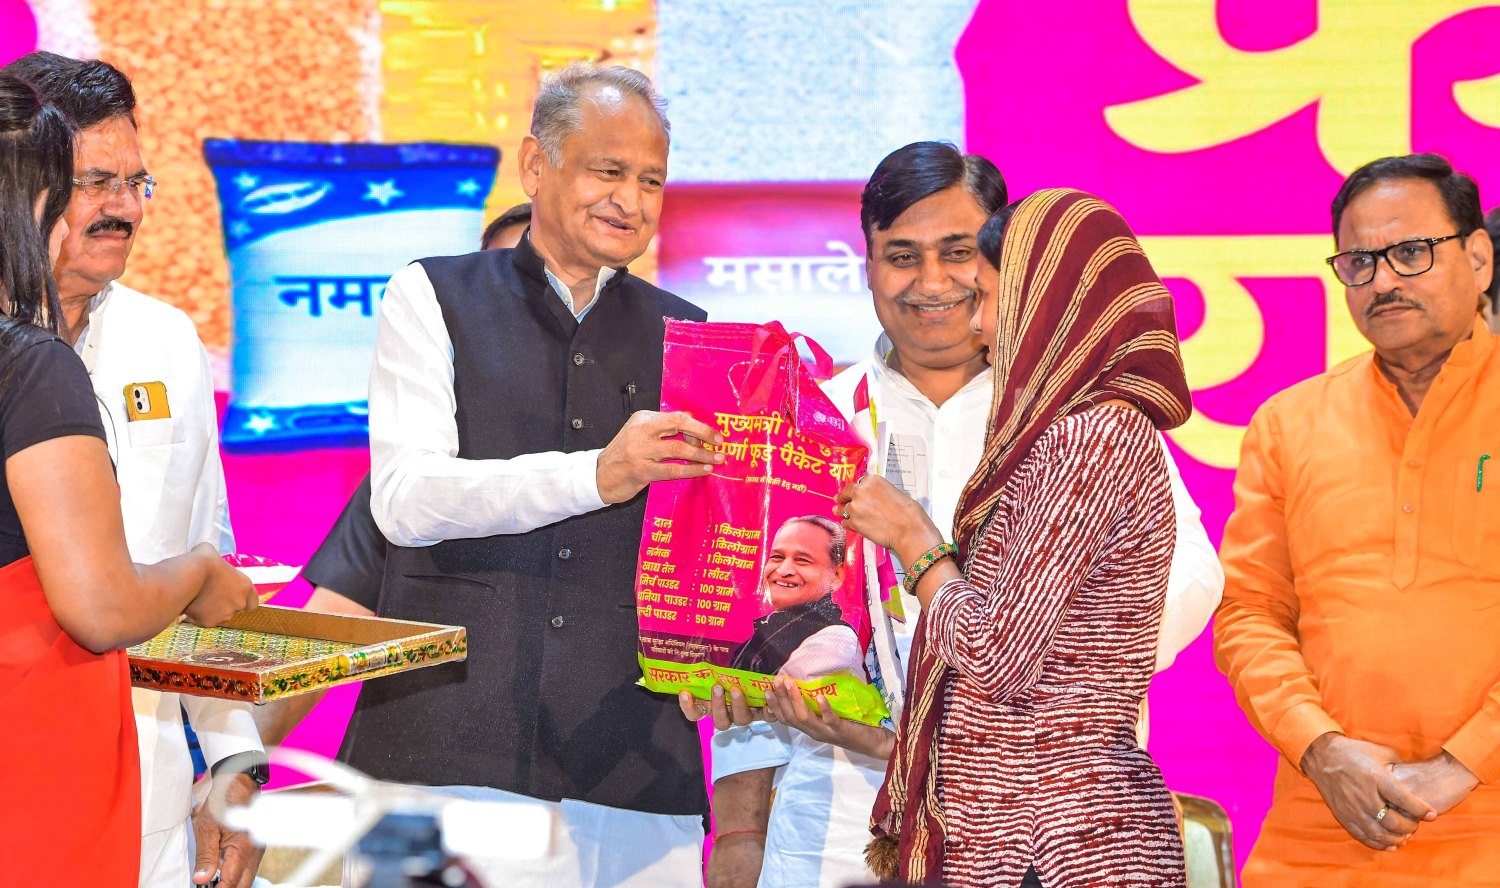 Launch of Mukhyamantri Nishulk Annapurna Food Packet Yojana, State Government is providing relief by bringing the public welfare schemes on the ground – Chief Minister